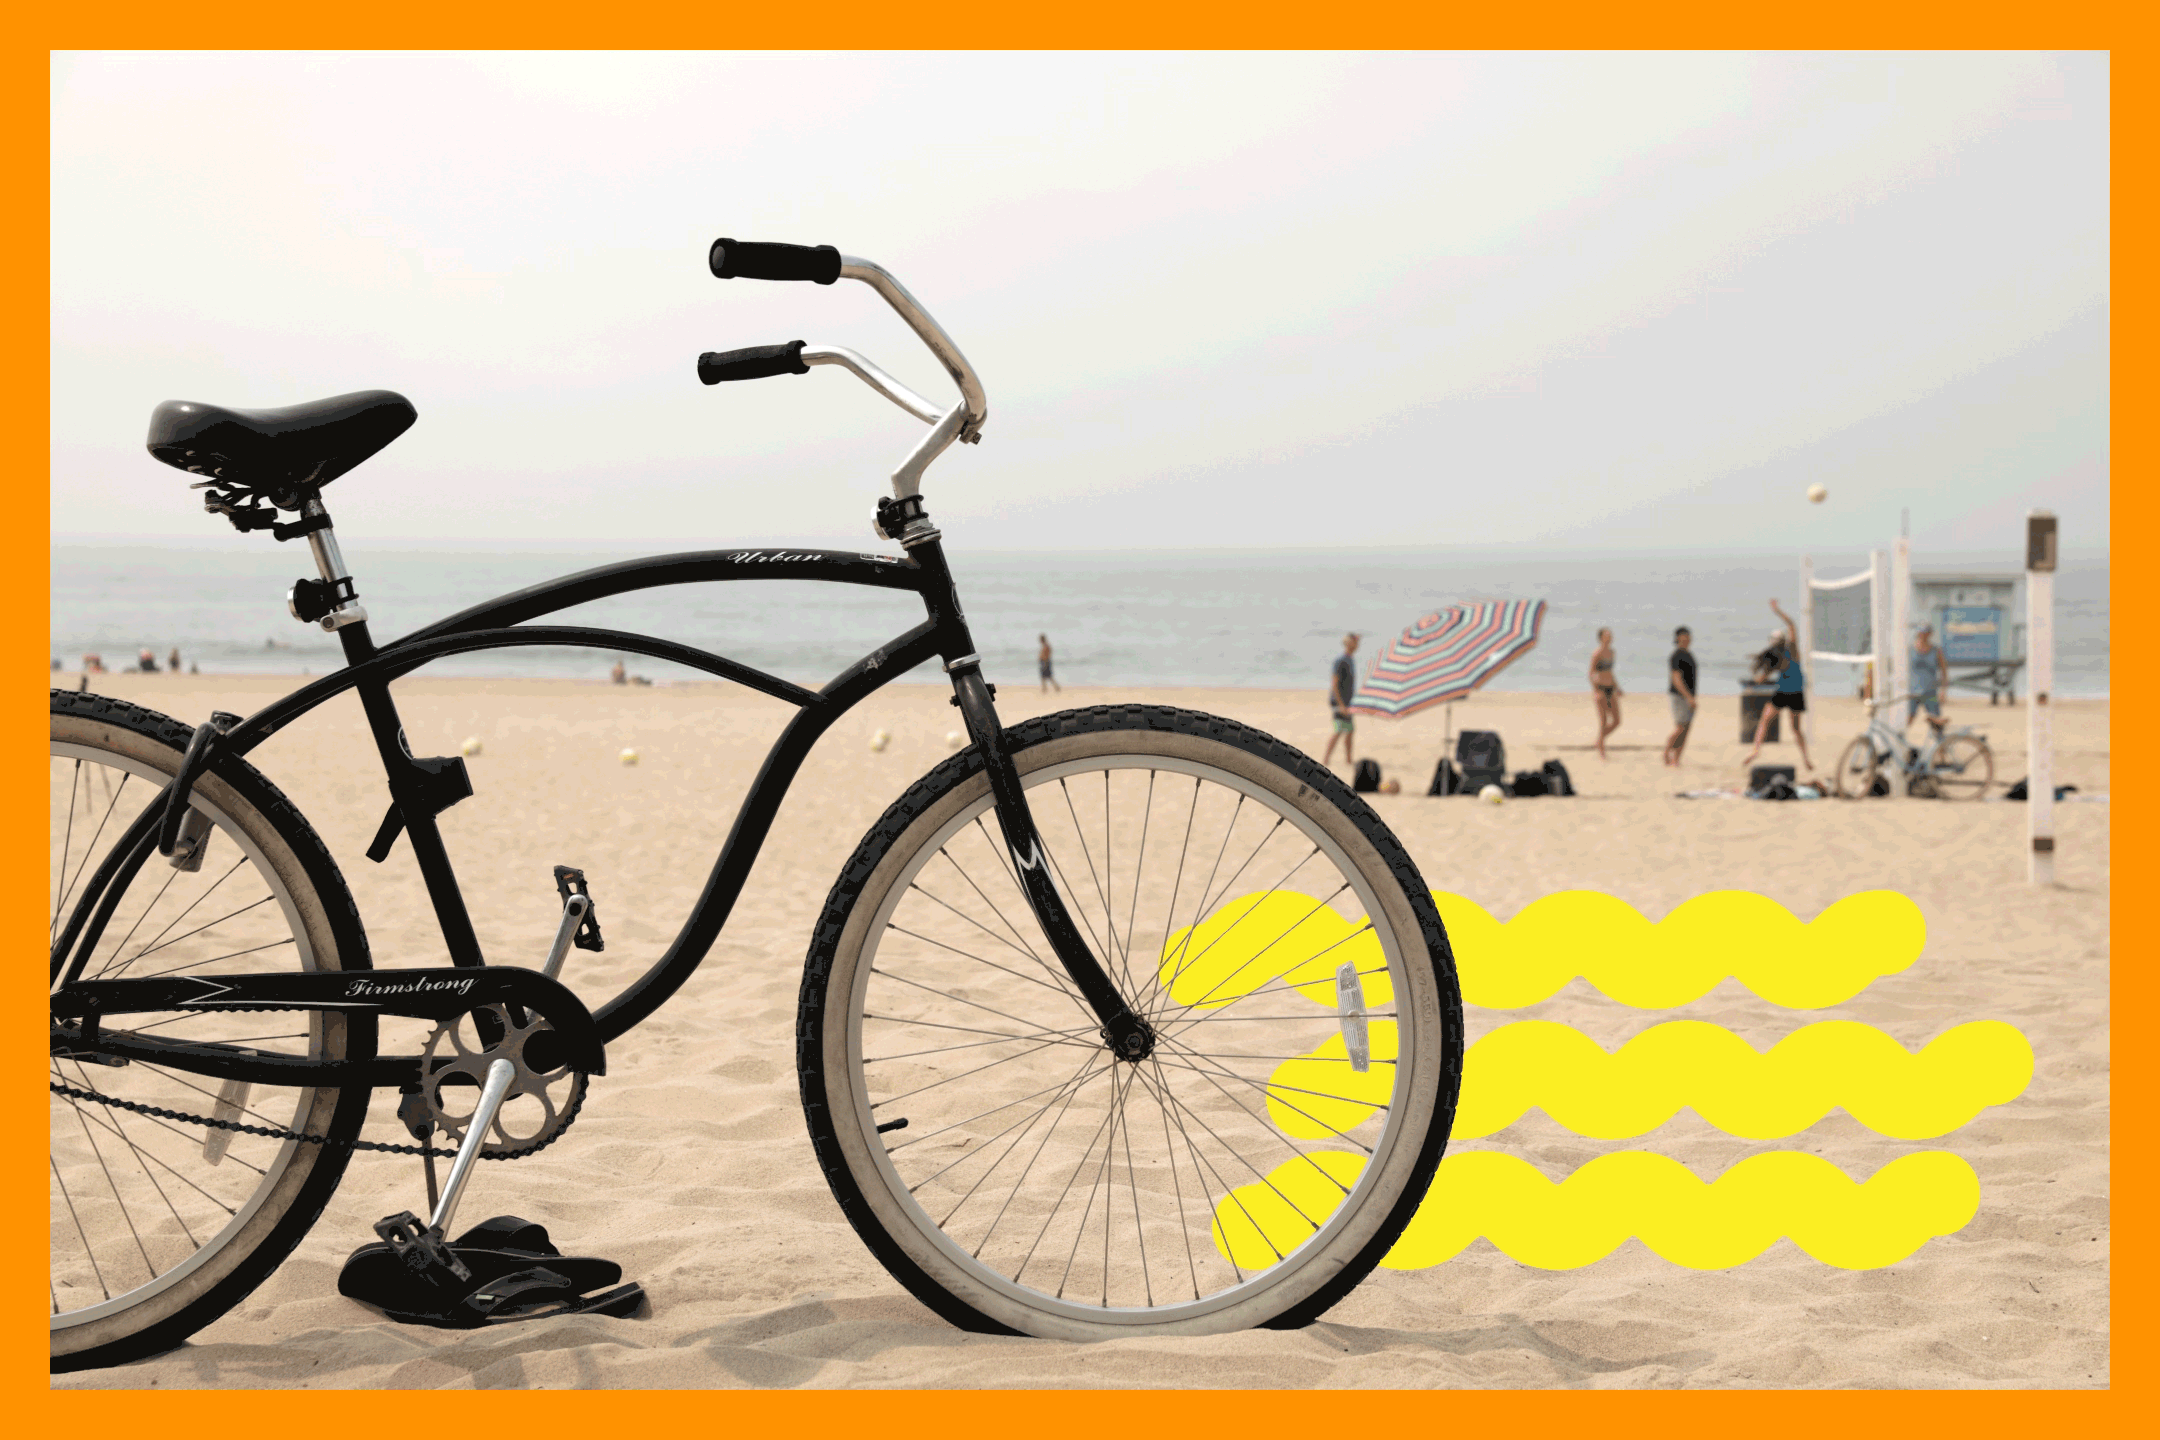 A bike rests in the sand near volleyball courts.